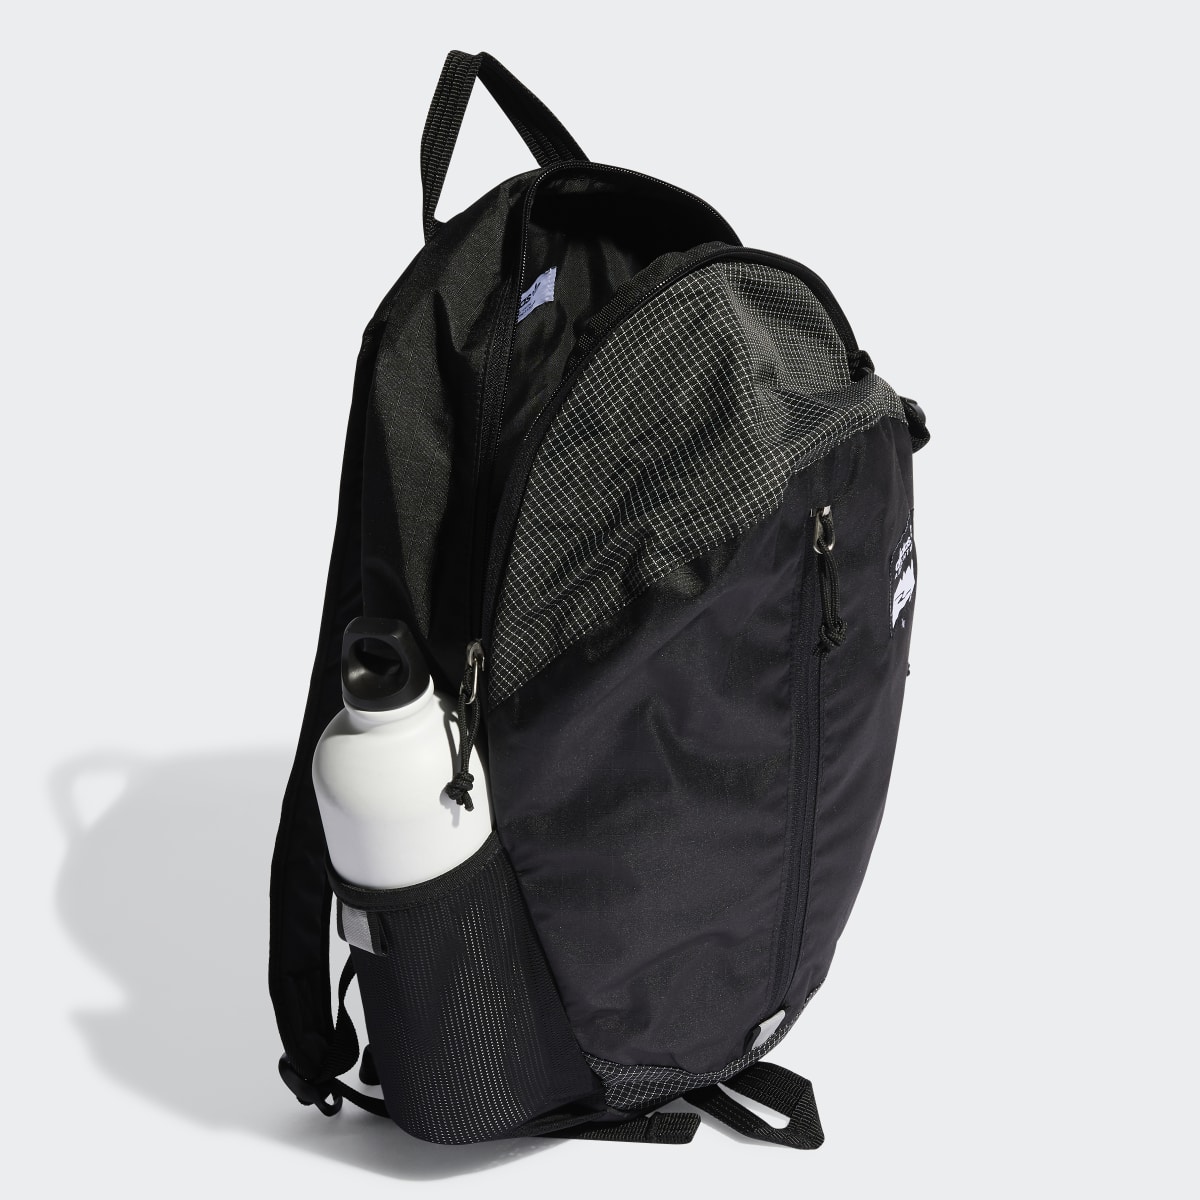 Adidas Adventure Backpack Small. 5